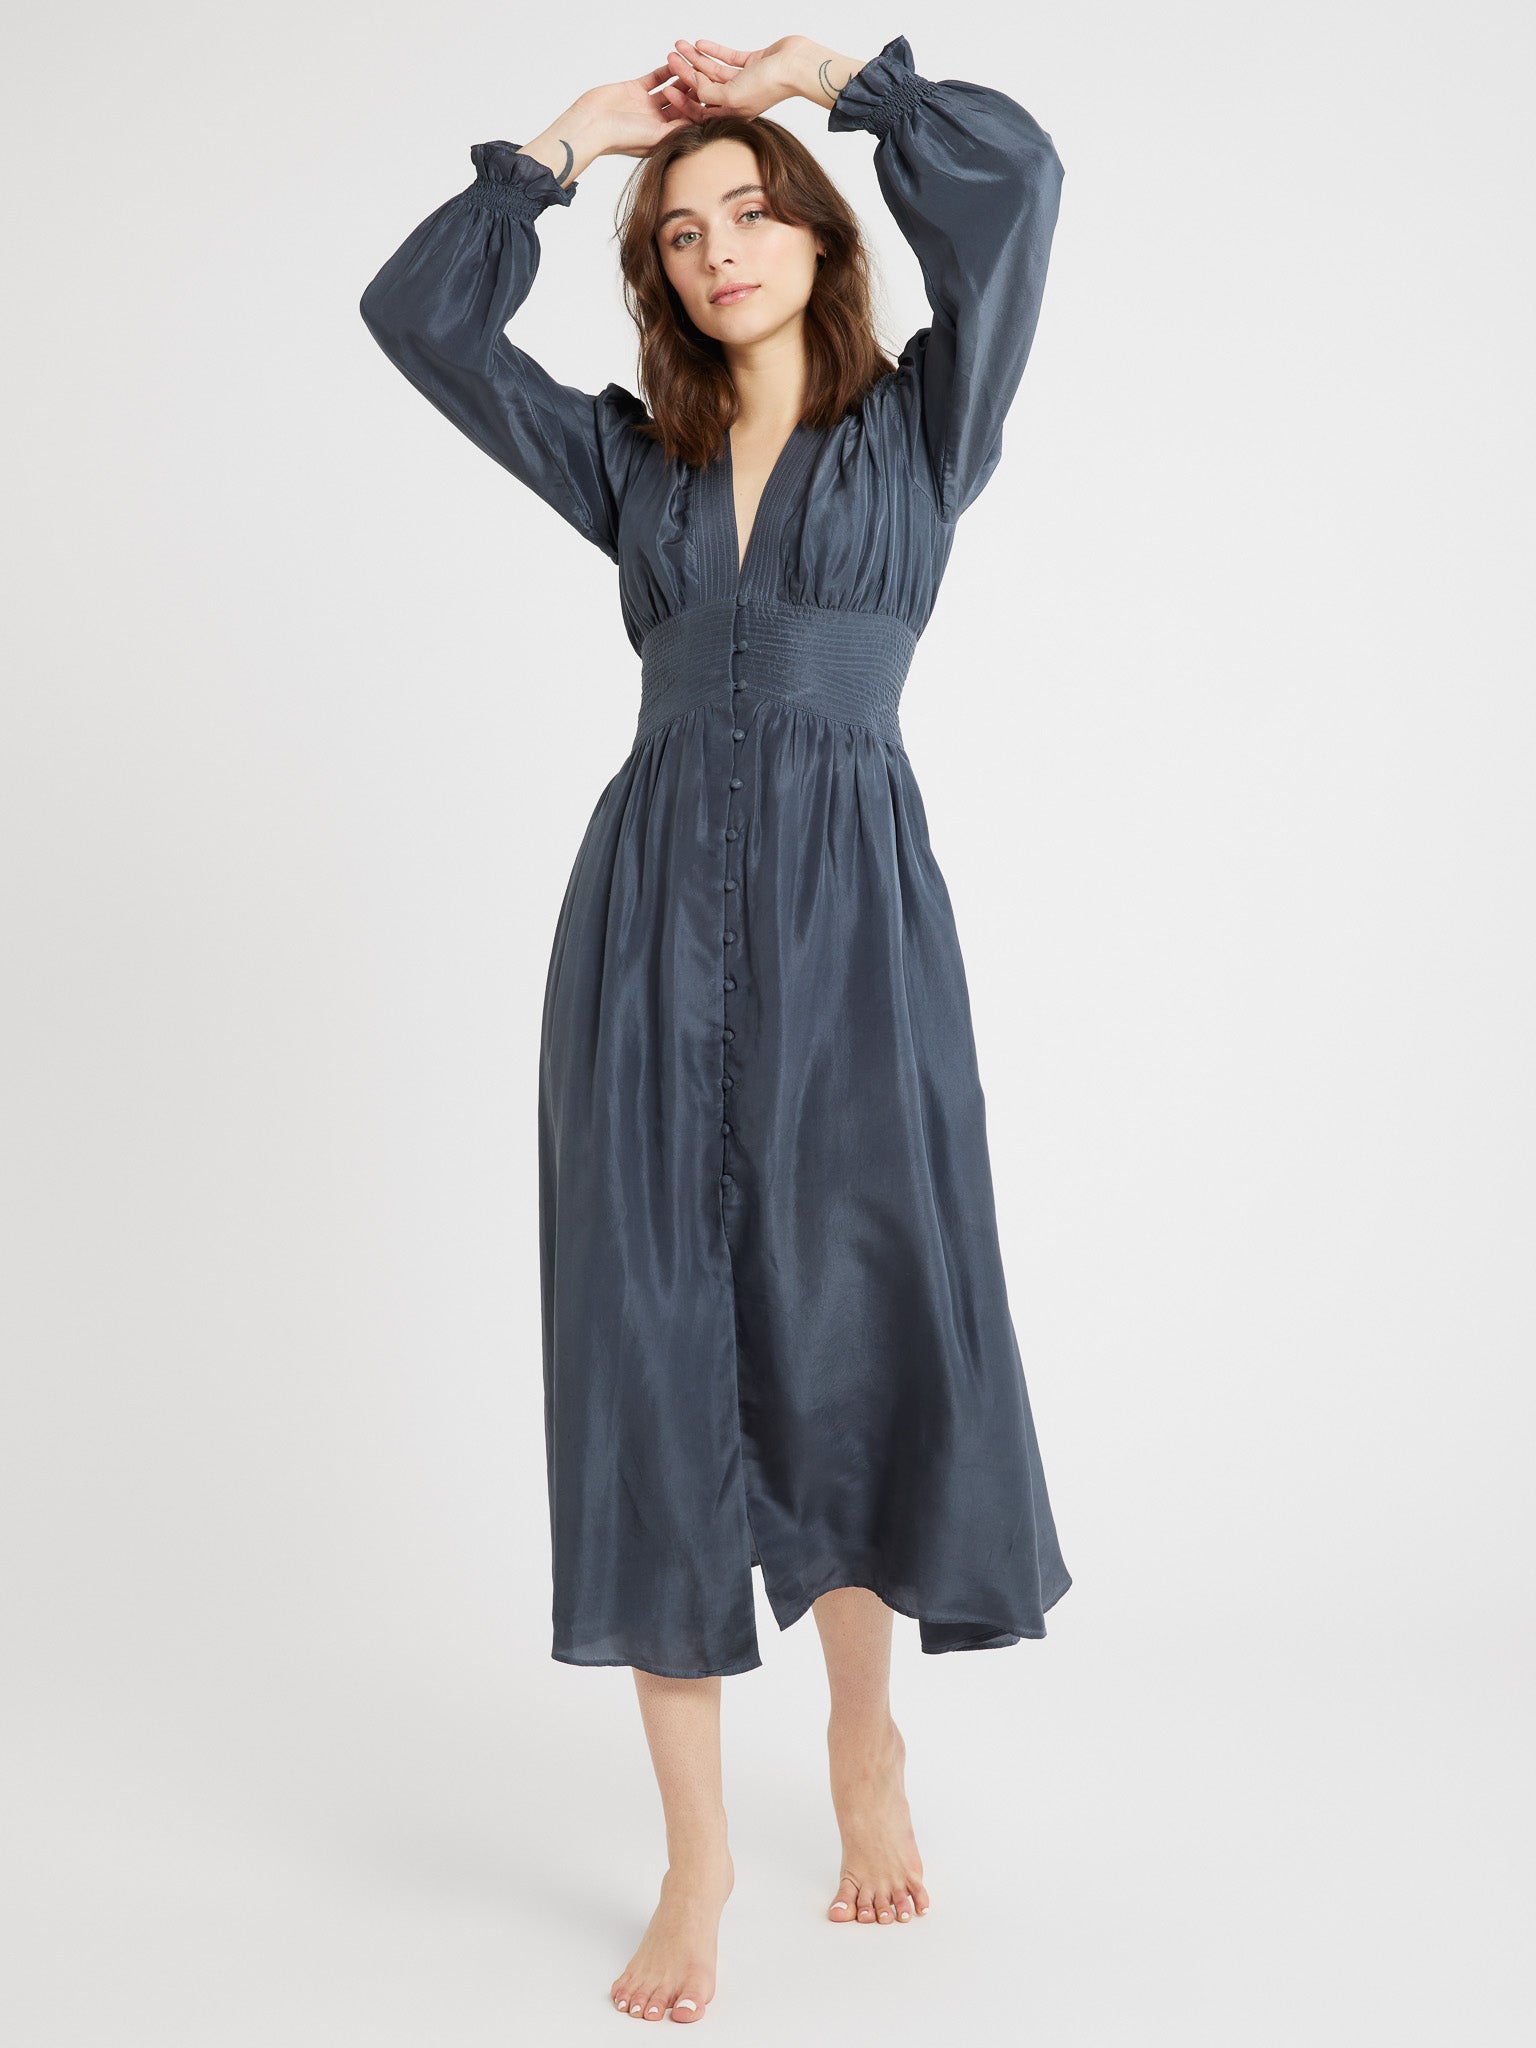 MILLE Clothing Anya Dress in Navy Washed Silk